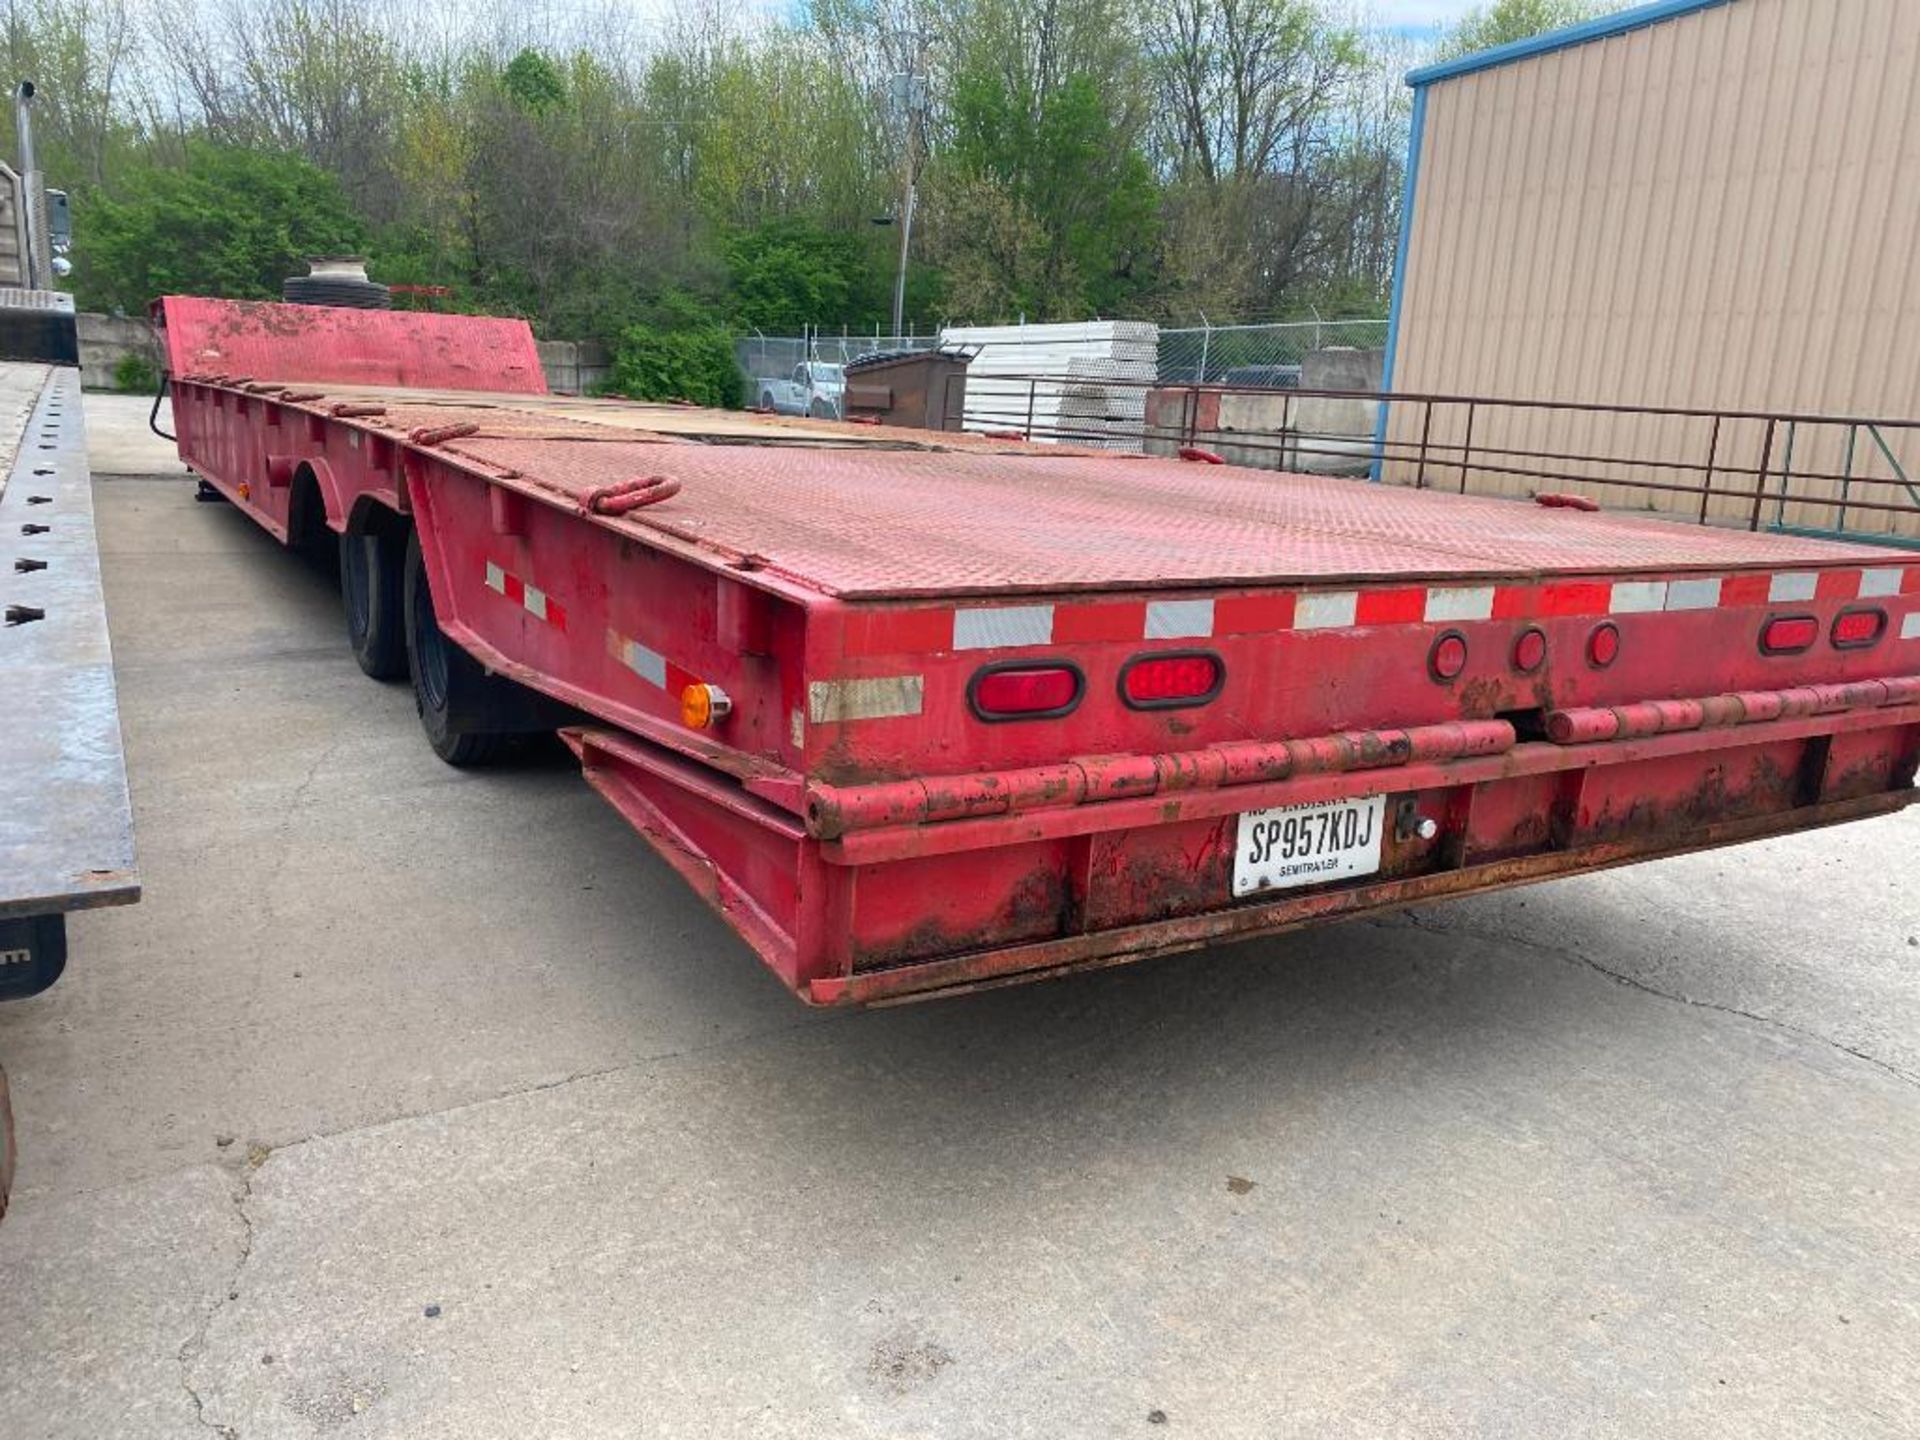 2007 Trail-Eze Tandem Axle Hydraulic Dove Tail Trailer, Winch, 38,175 GVWR - Image 7 of 10